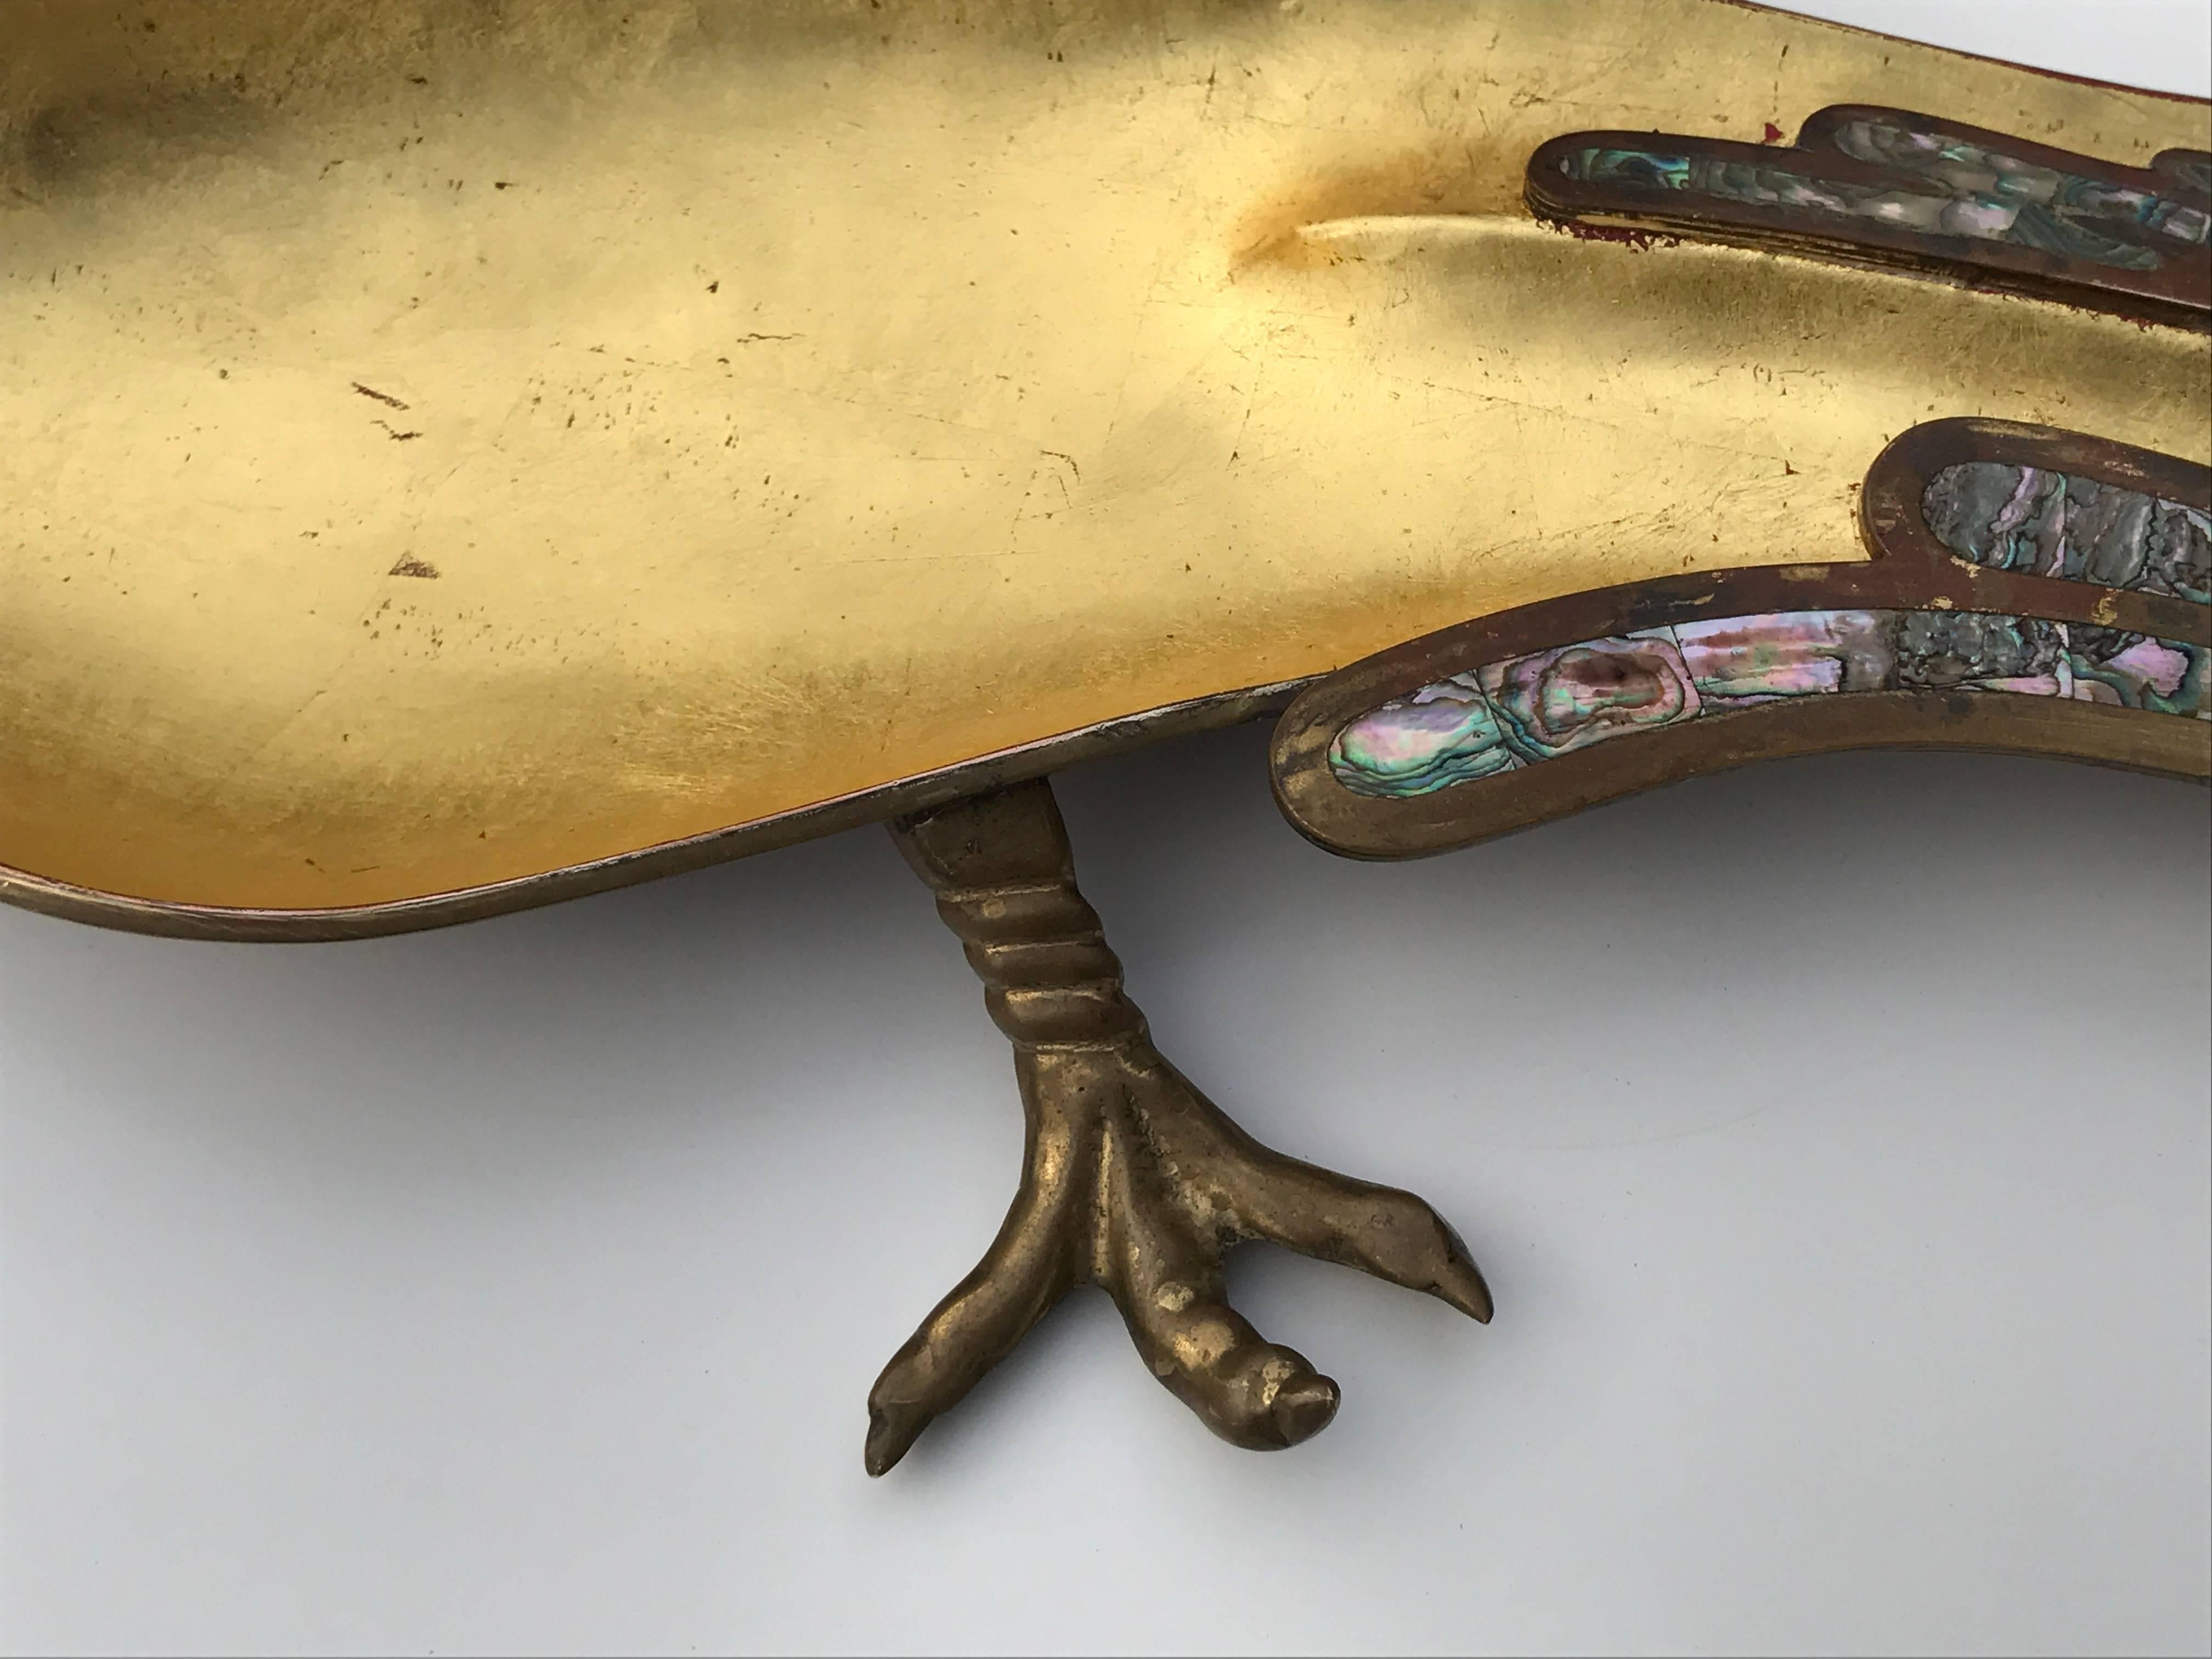 Parrot dish by Los Castillos Mexico.
Designed by Emilio Castillo made of mixed metals, gold leaf and abalone shell.